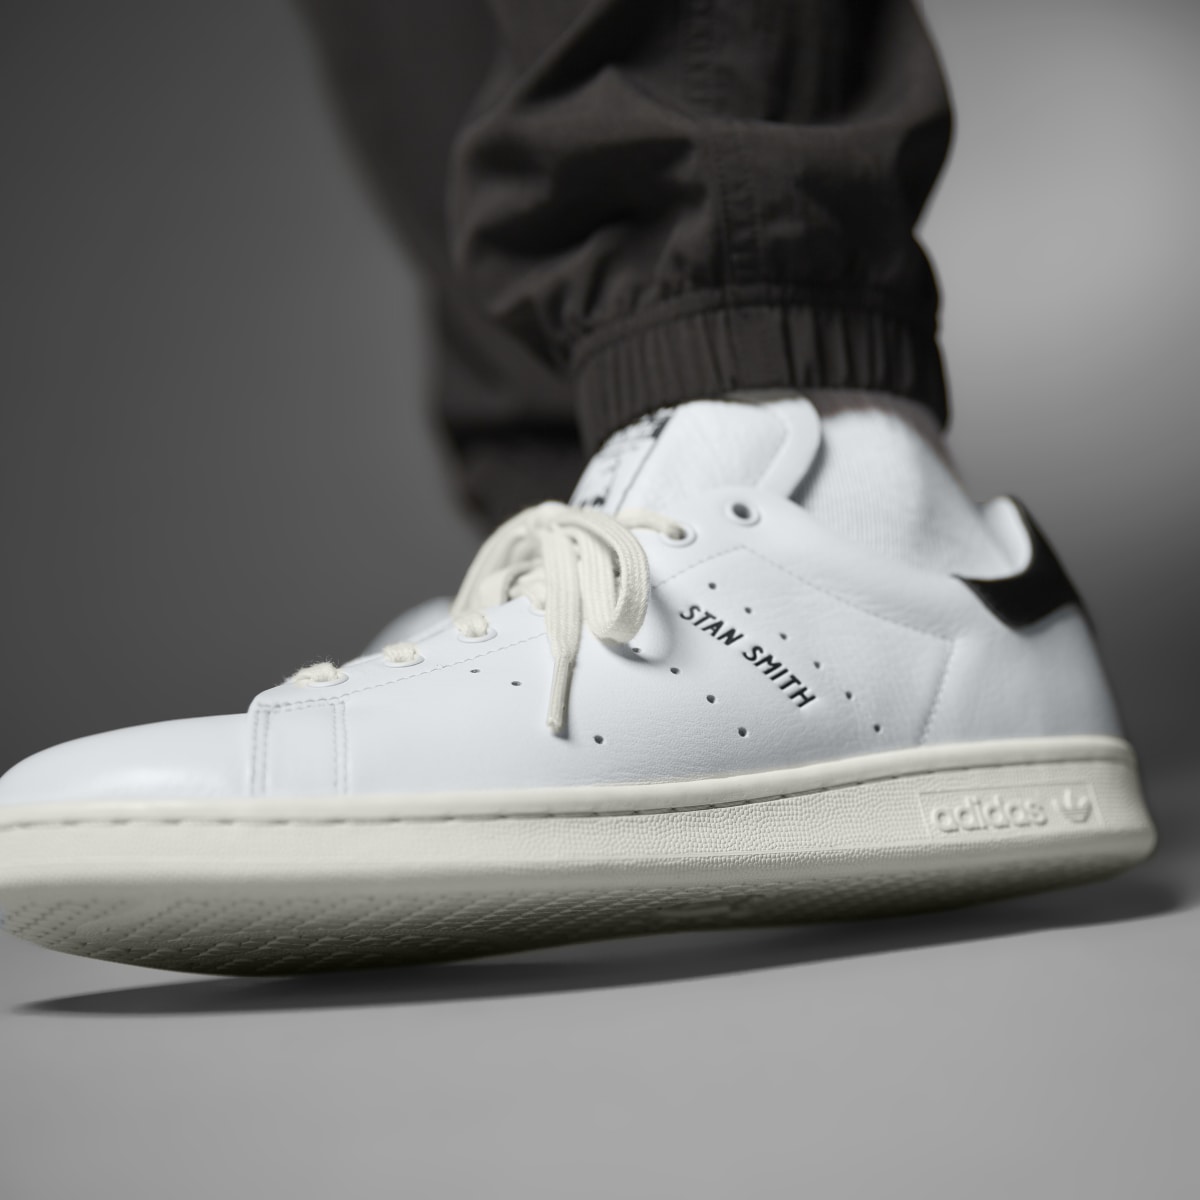 Adidas Chaussure Stan Smith Lux. 7